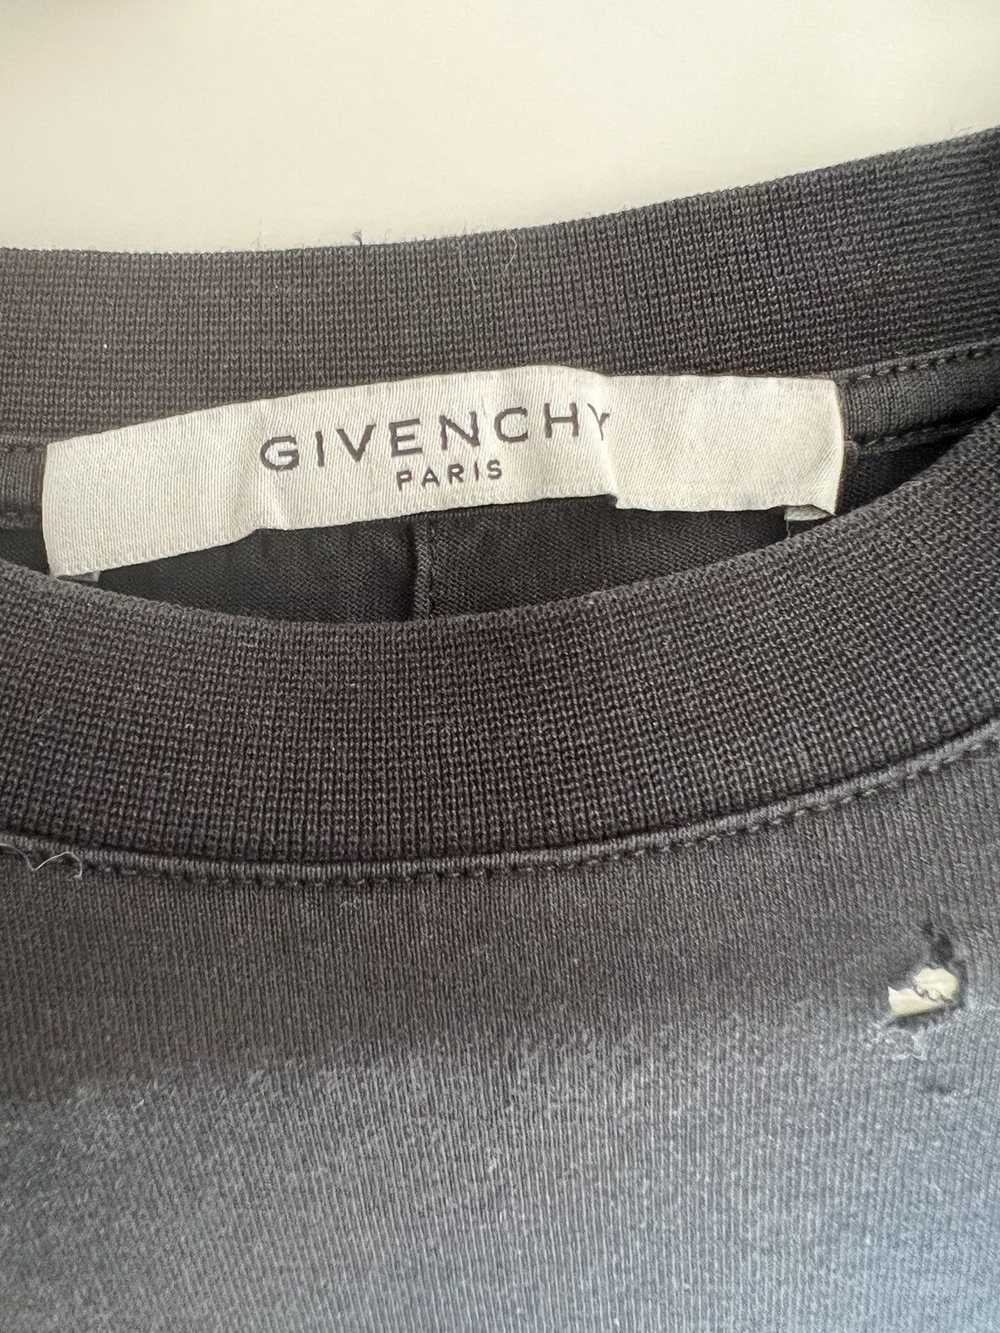 Givenchy Givenchy Distressed T Shirt - image 4